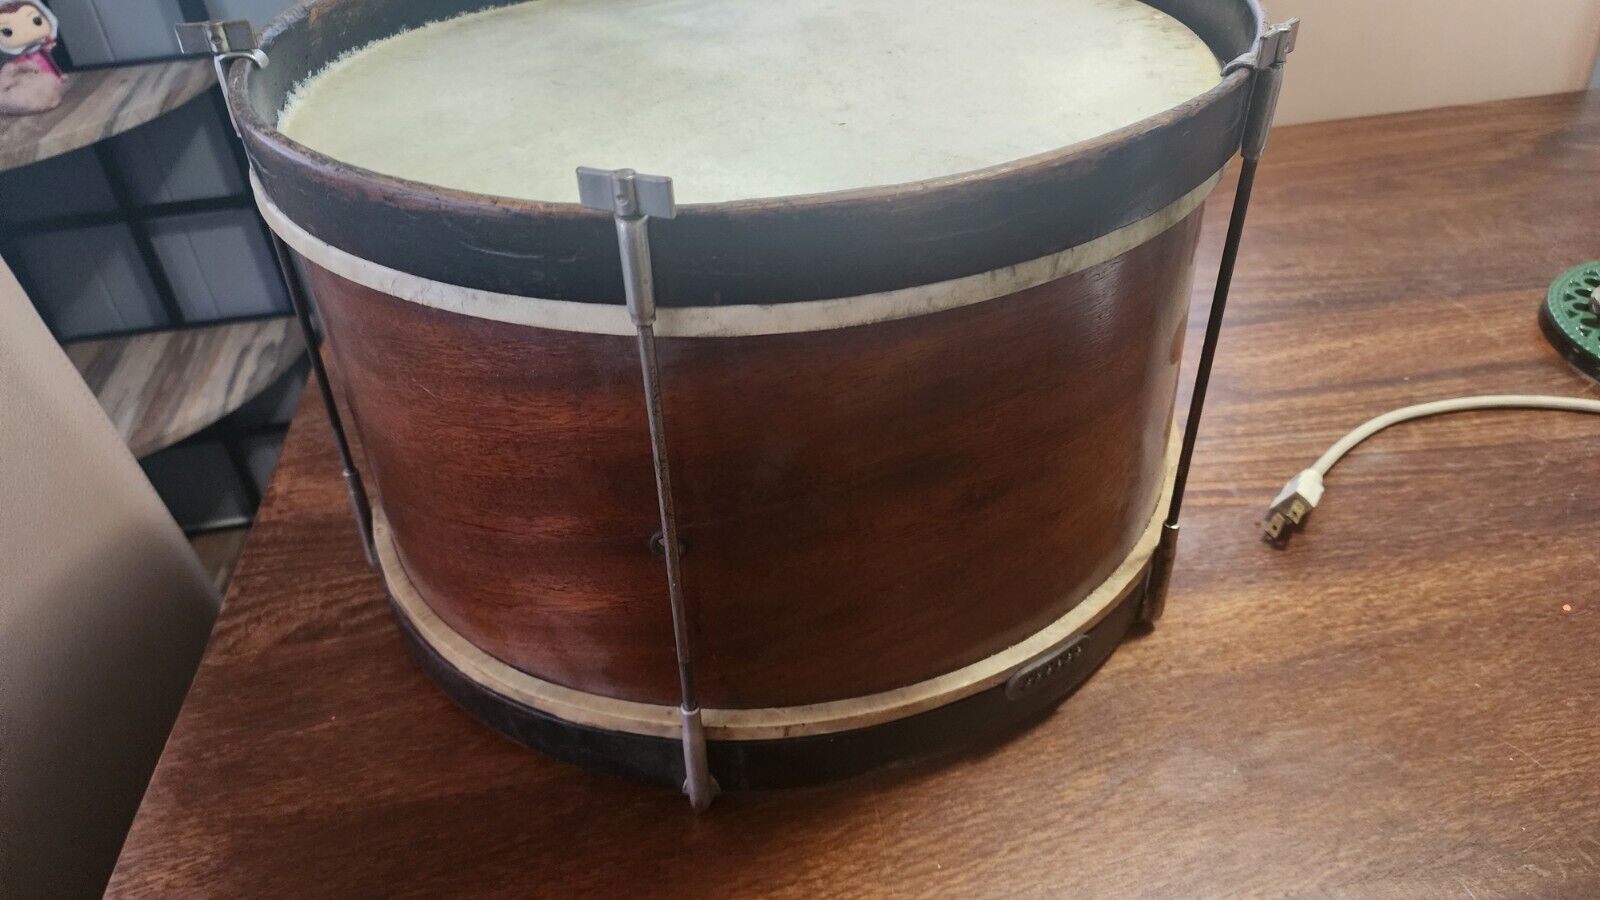 Late 1800s to Early 1900s Antique C. G. Conn Wood Snare Drum 